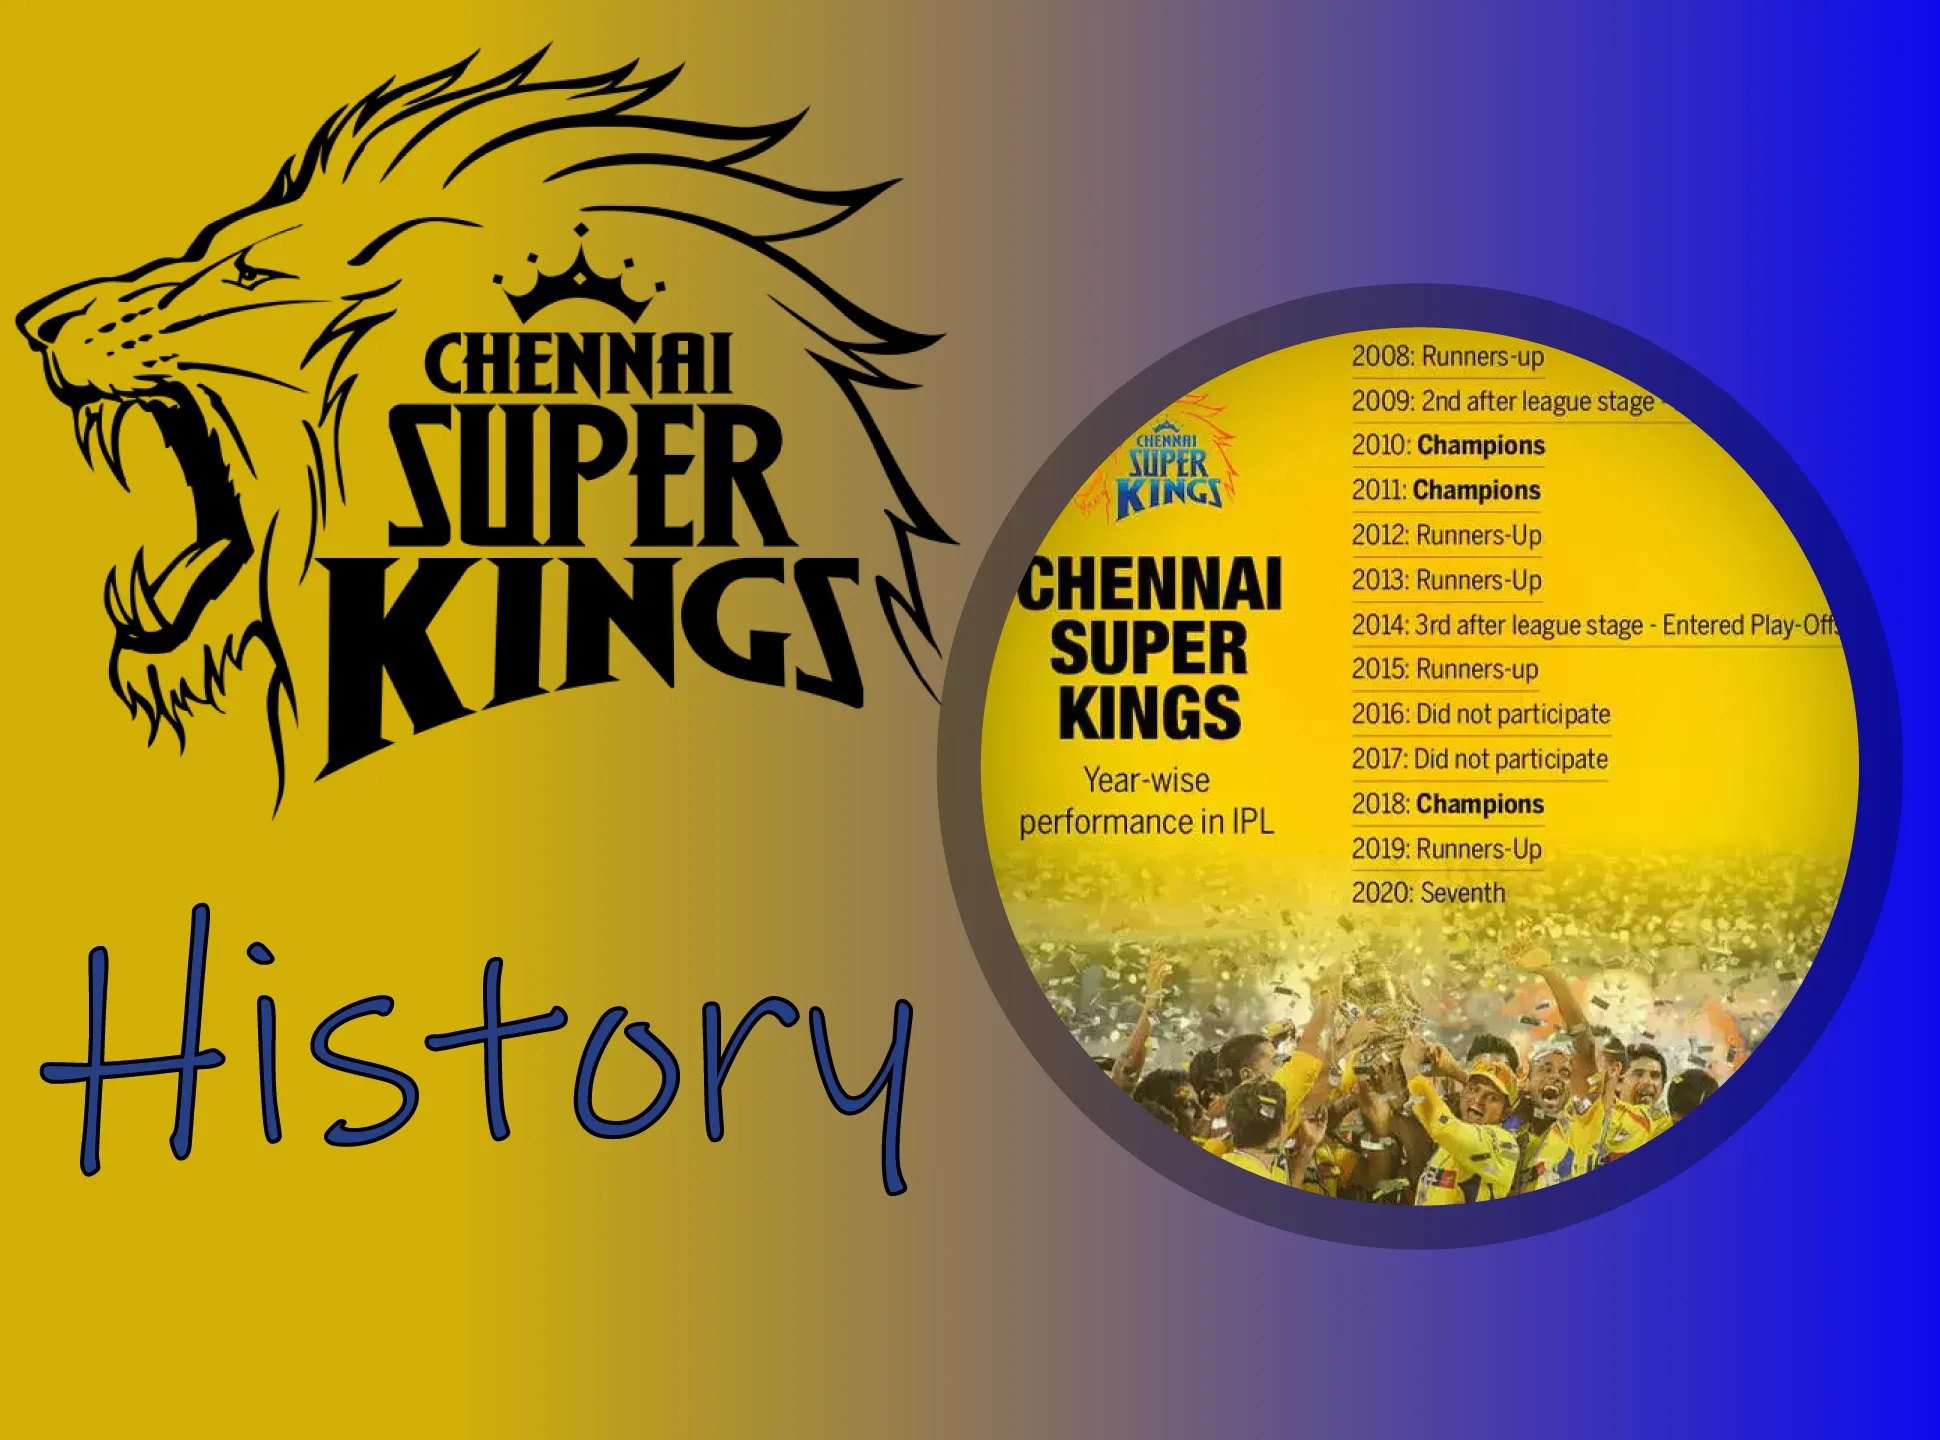 Take a look at the CSK history.